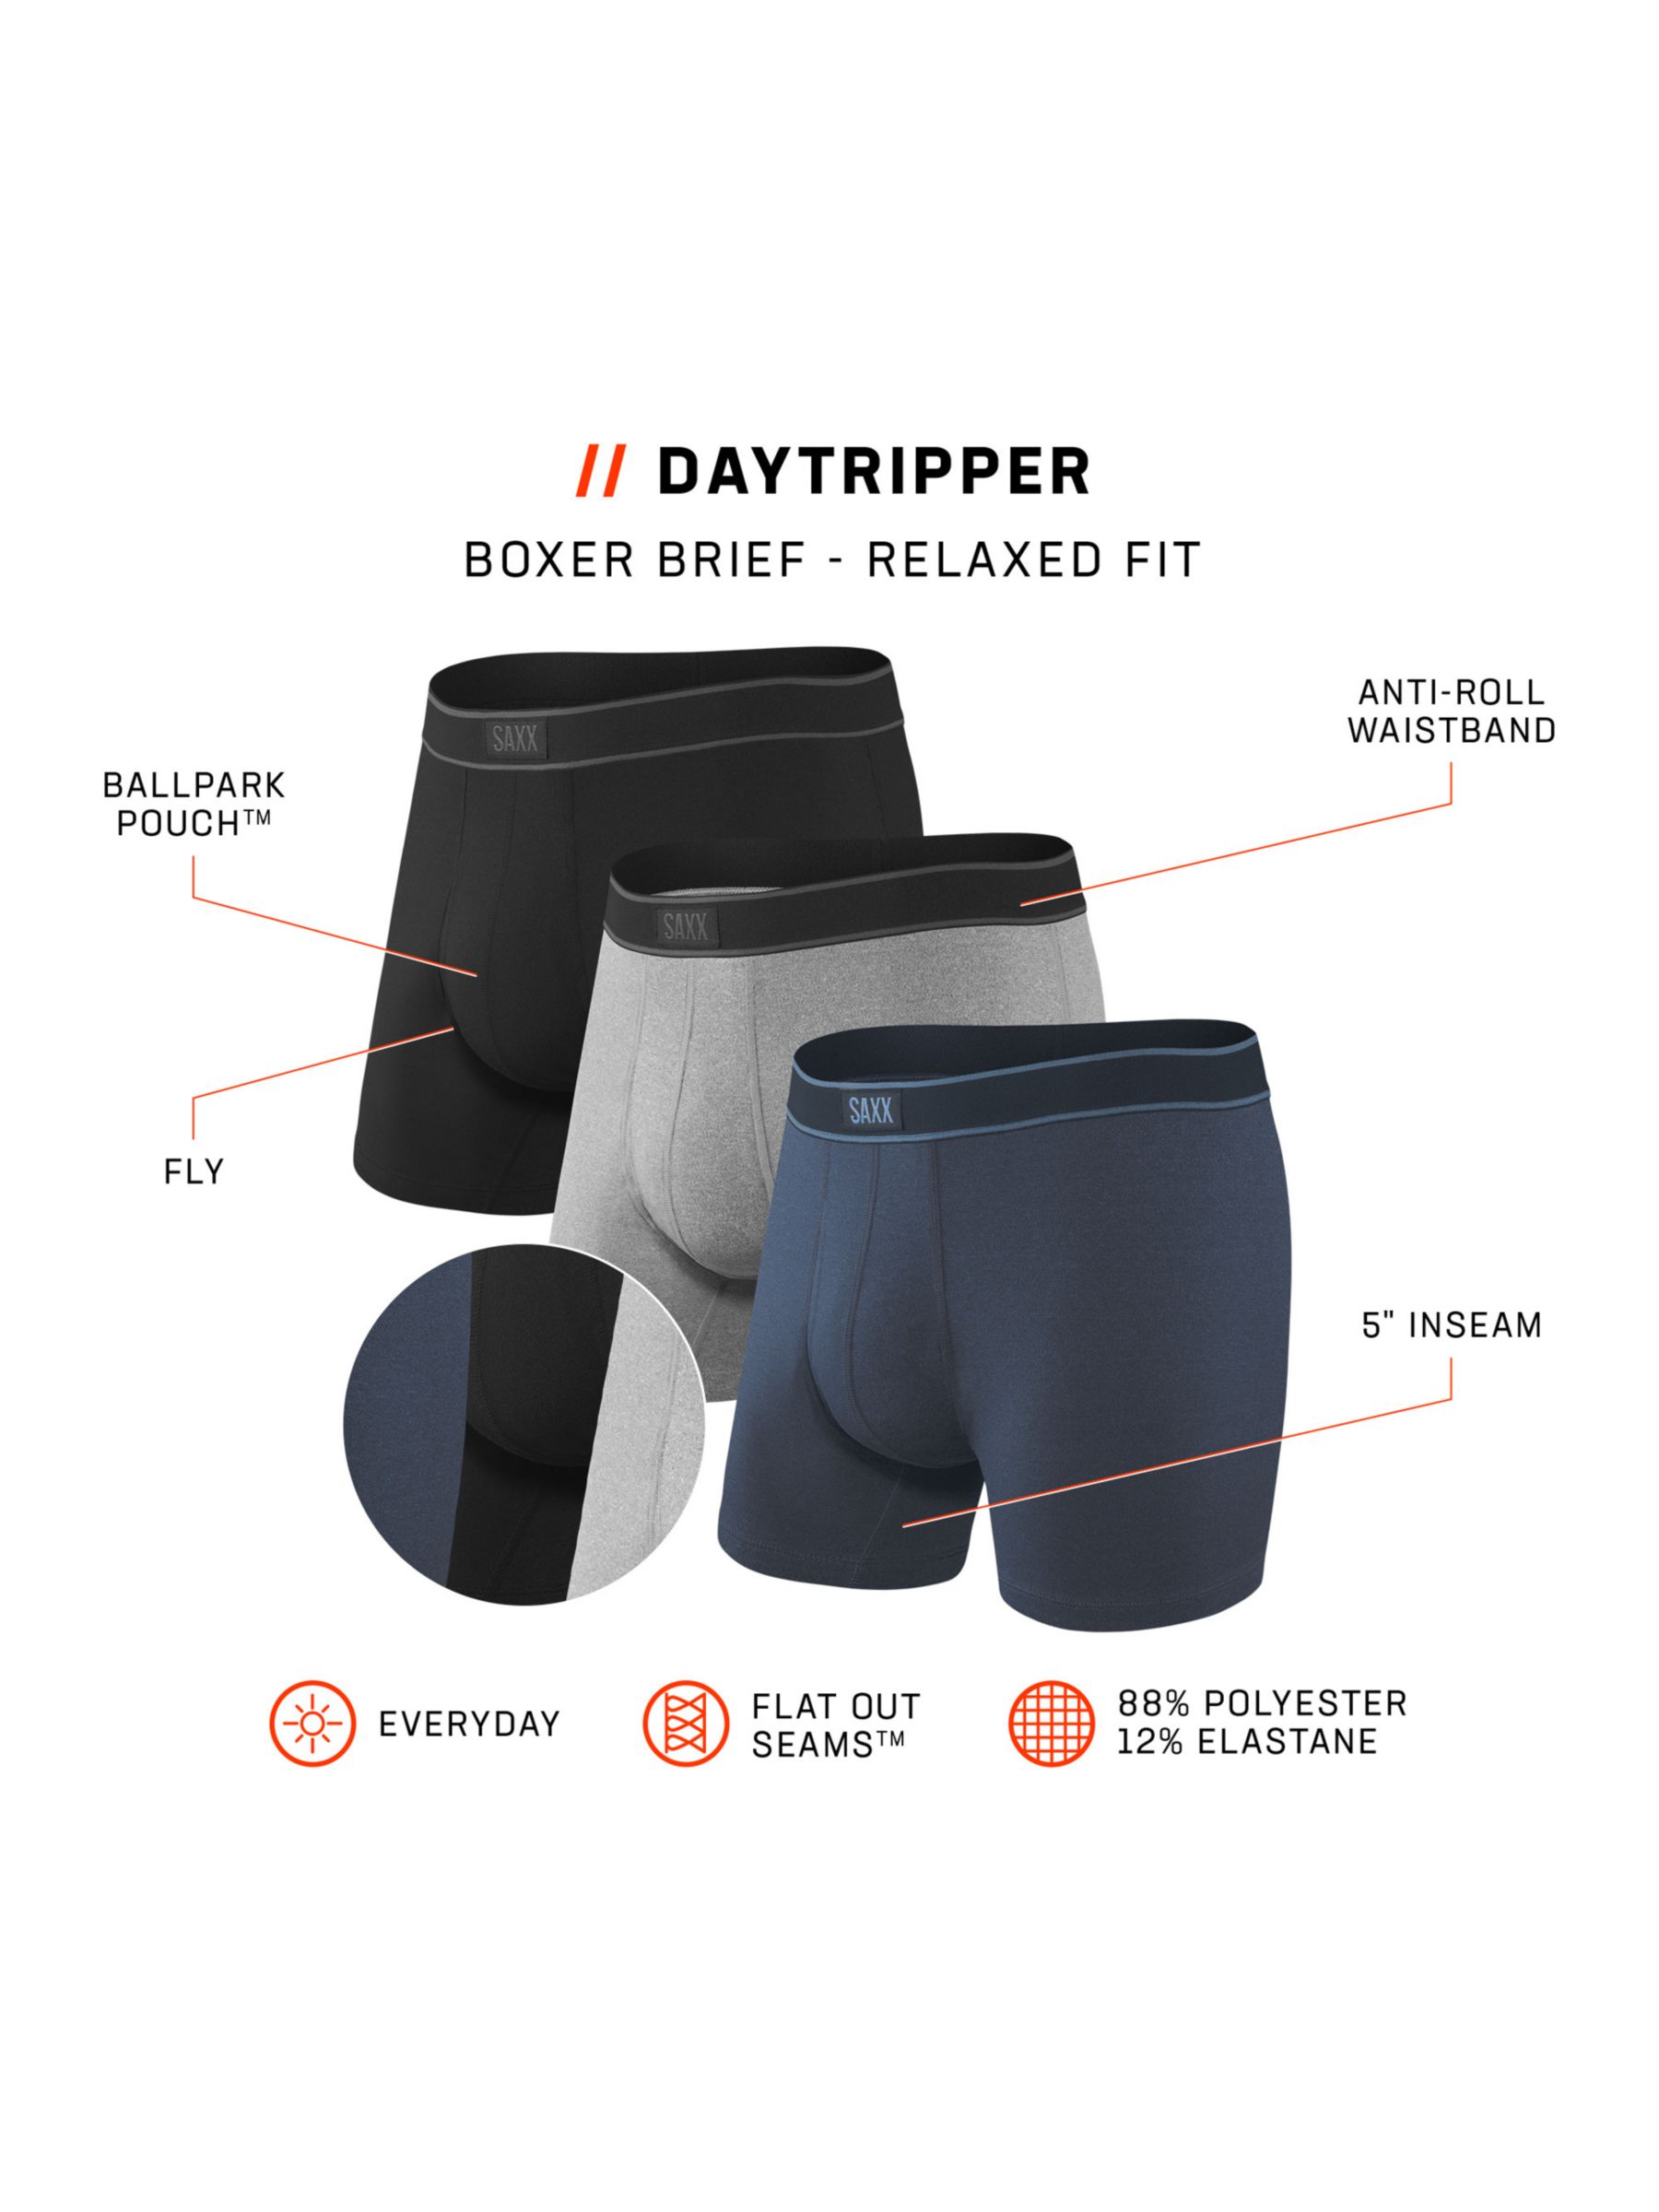 SAXX Daytripper Trunks, Pack of 3, Black/Grey/Navy at John Lewis & Partners